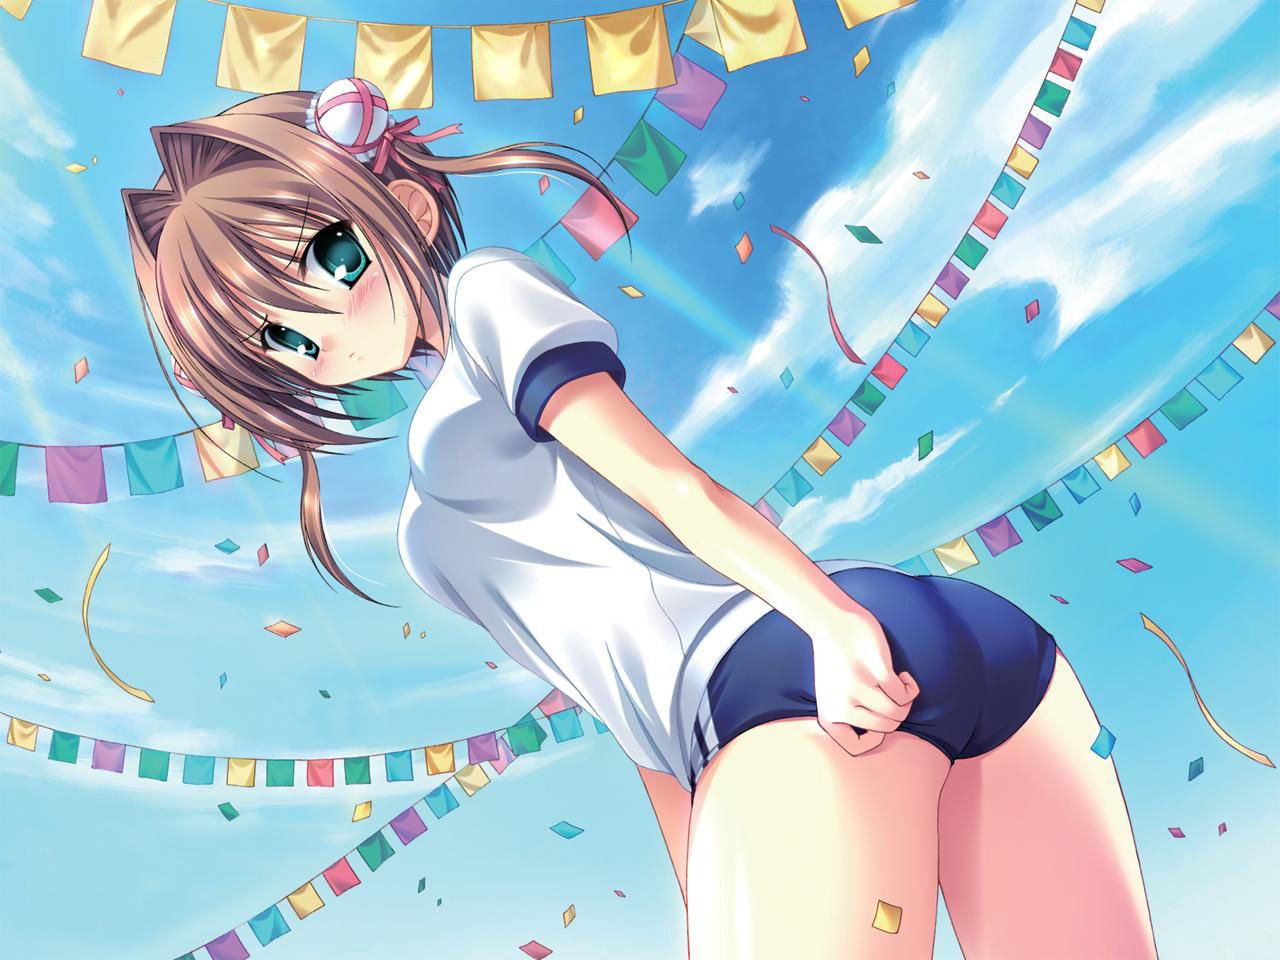 [Bloomers] soon Sports day! Gymnastics clothes, bloomers is erotic moe picture of beautiful Girl our 3 [2-d] 7